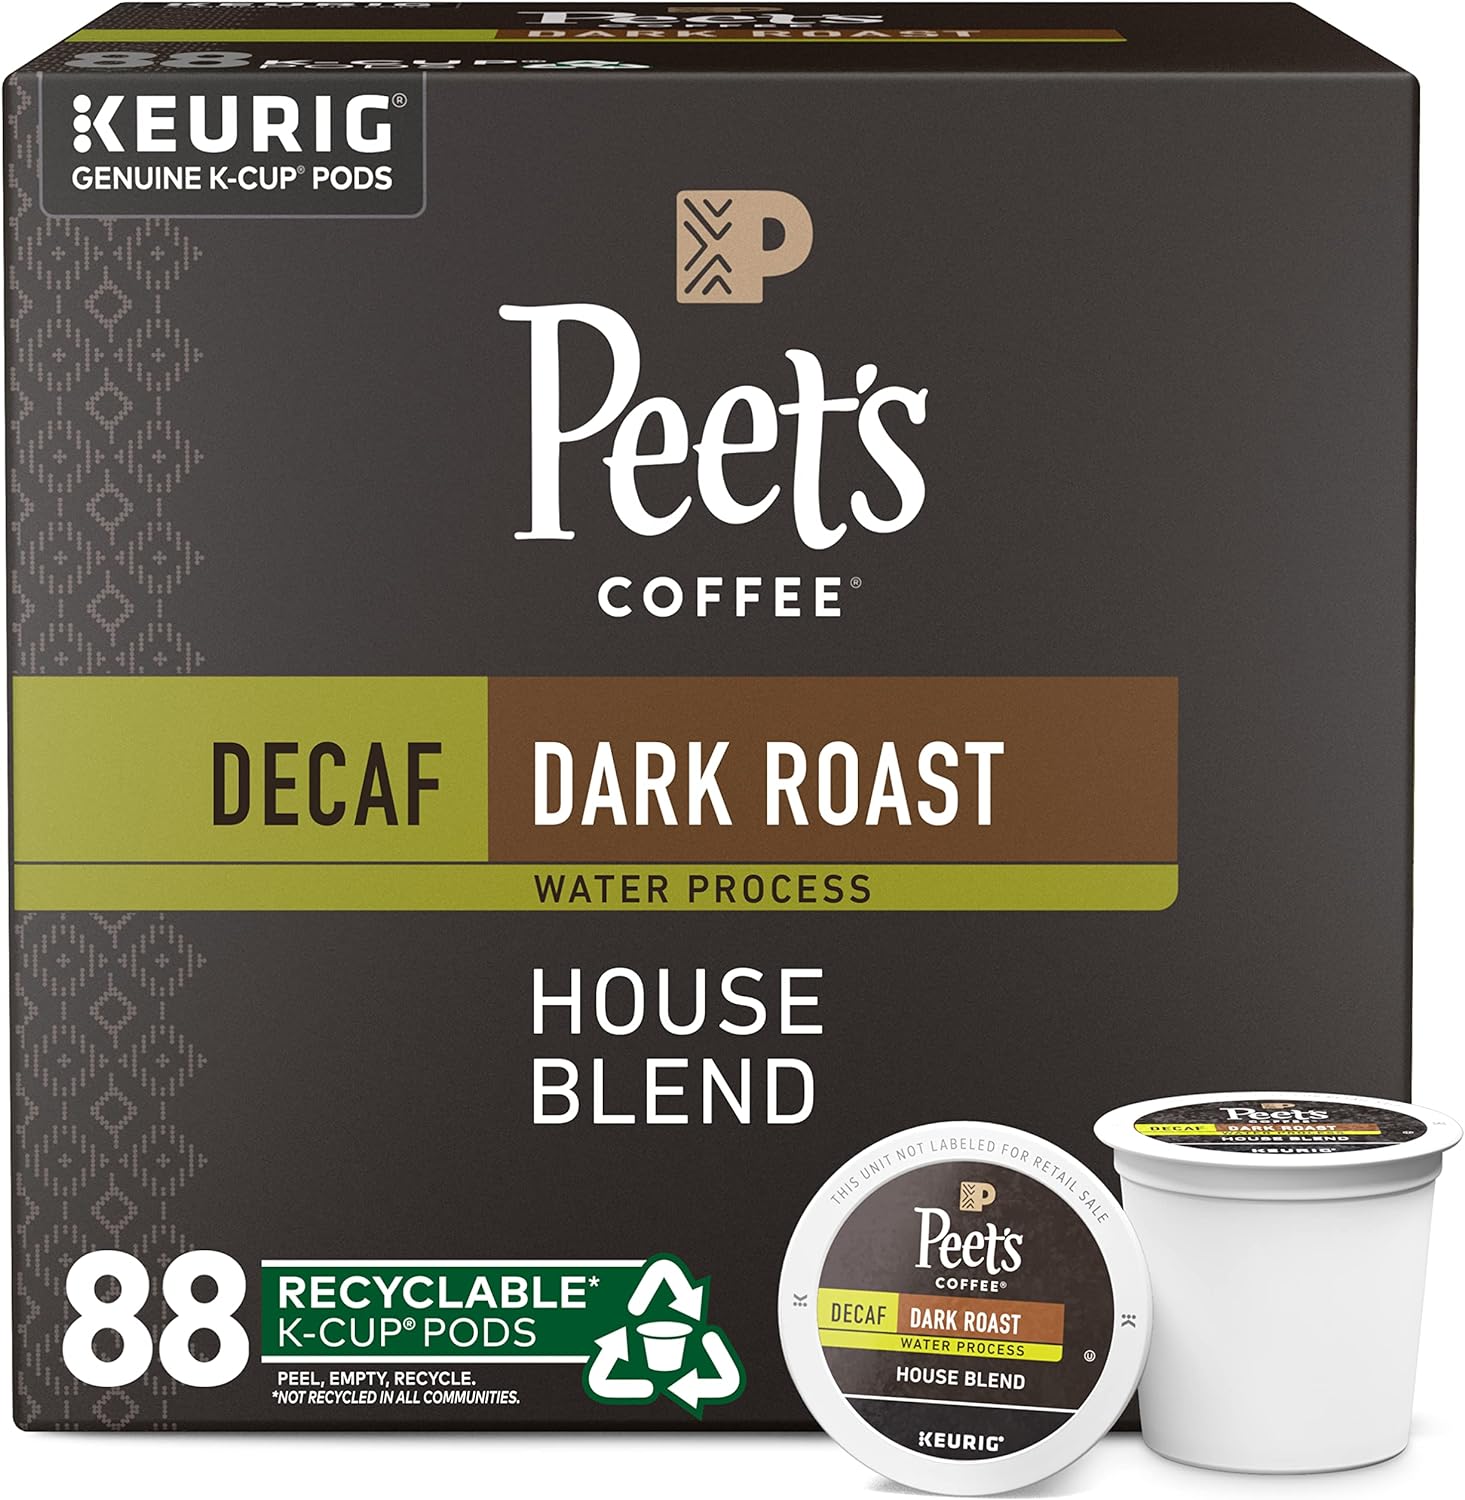 Peet's Coffee, Dark Roast Decaffeinated Coffee K-Cup Pods for Keurig Brewers - Decaf House Blend 88 Count (4 Boxes of 22 K-Cup Pods)